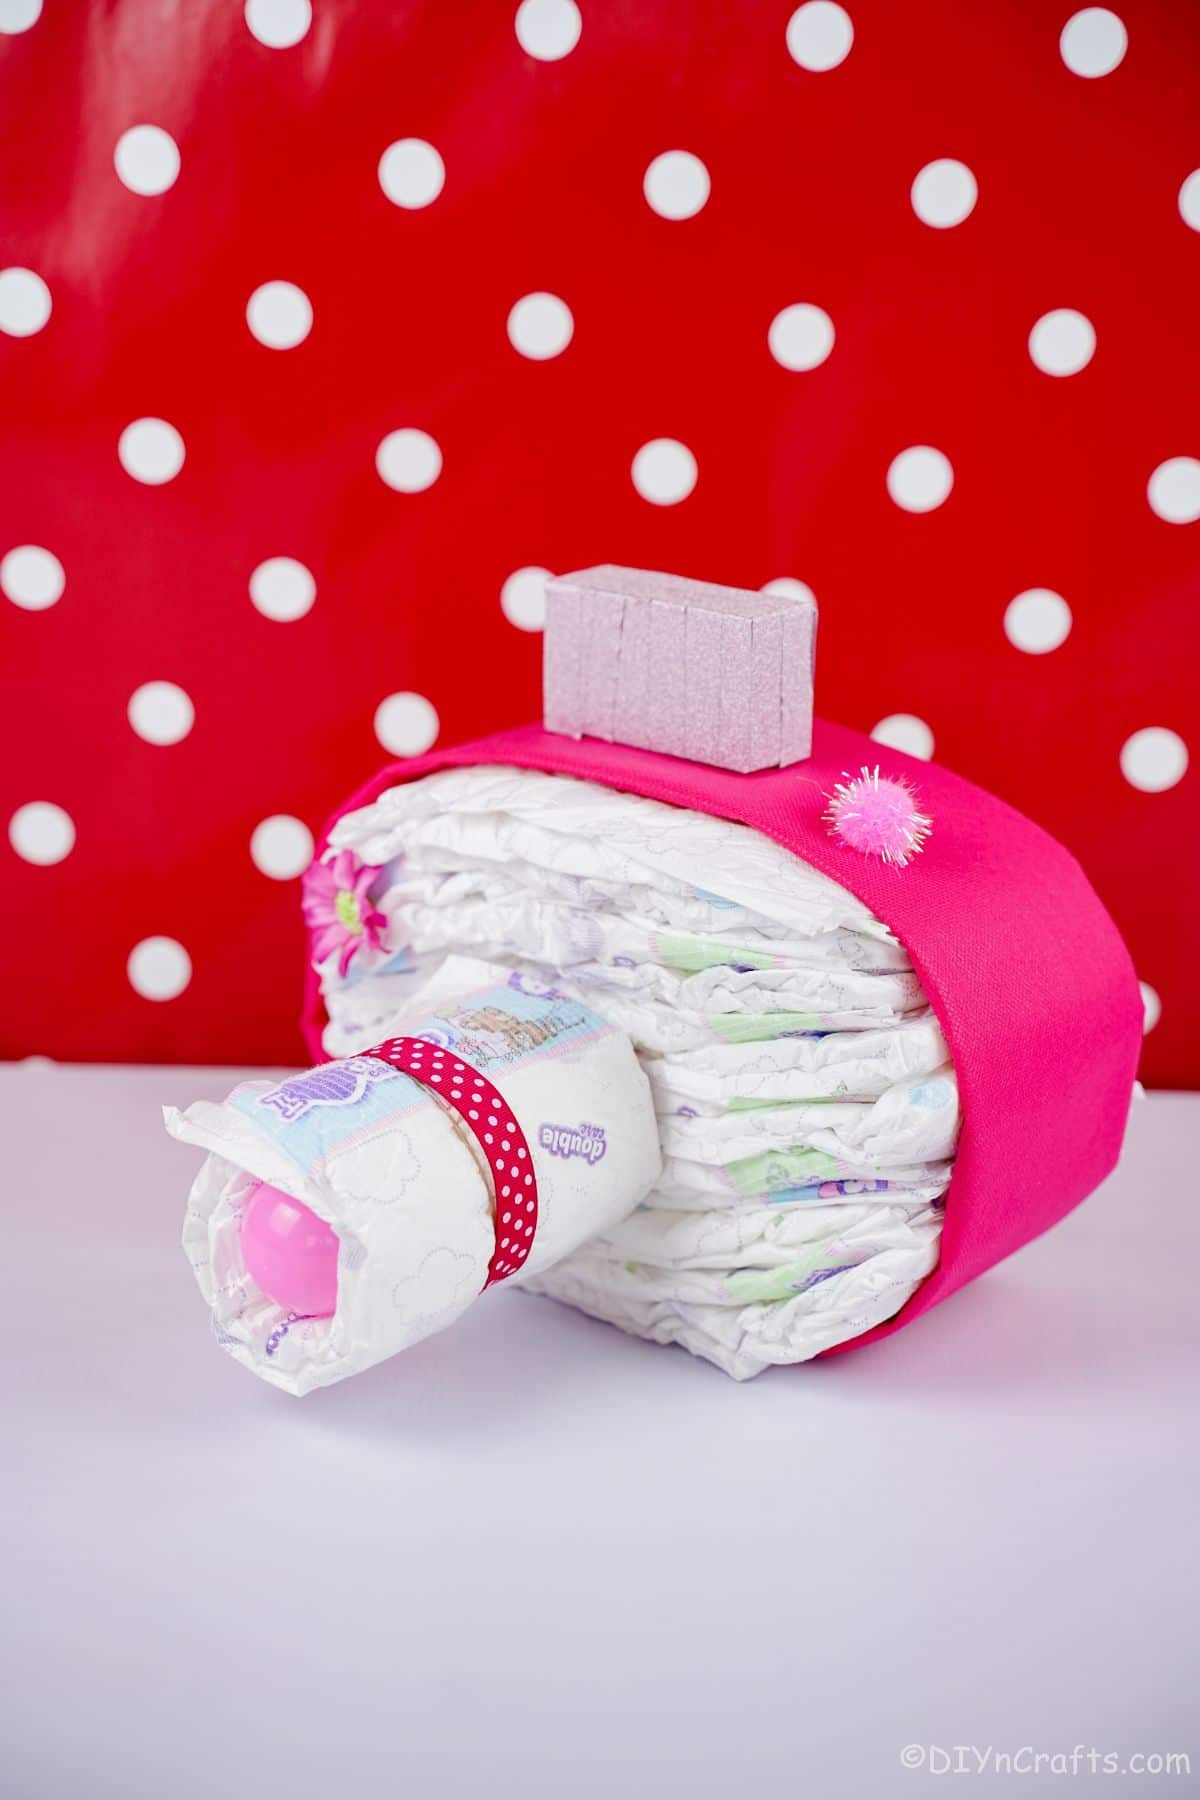 red and white polka dot background behind pink camera diaper cake